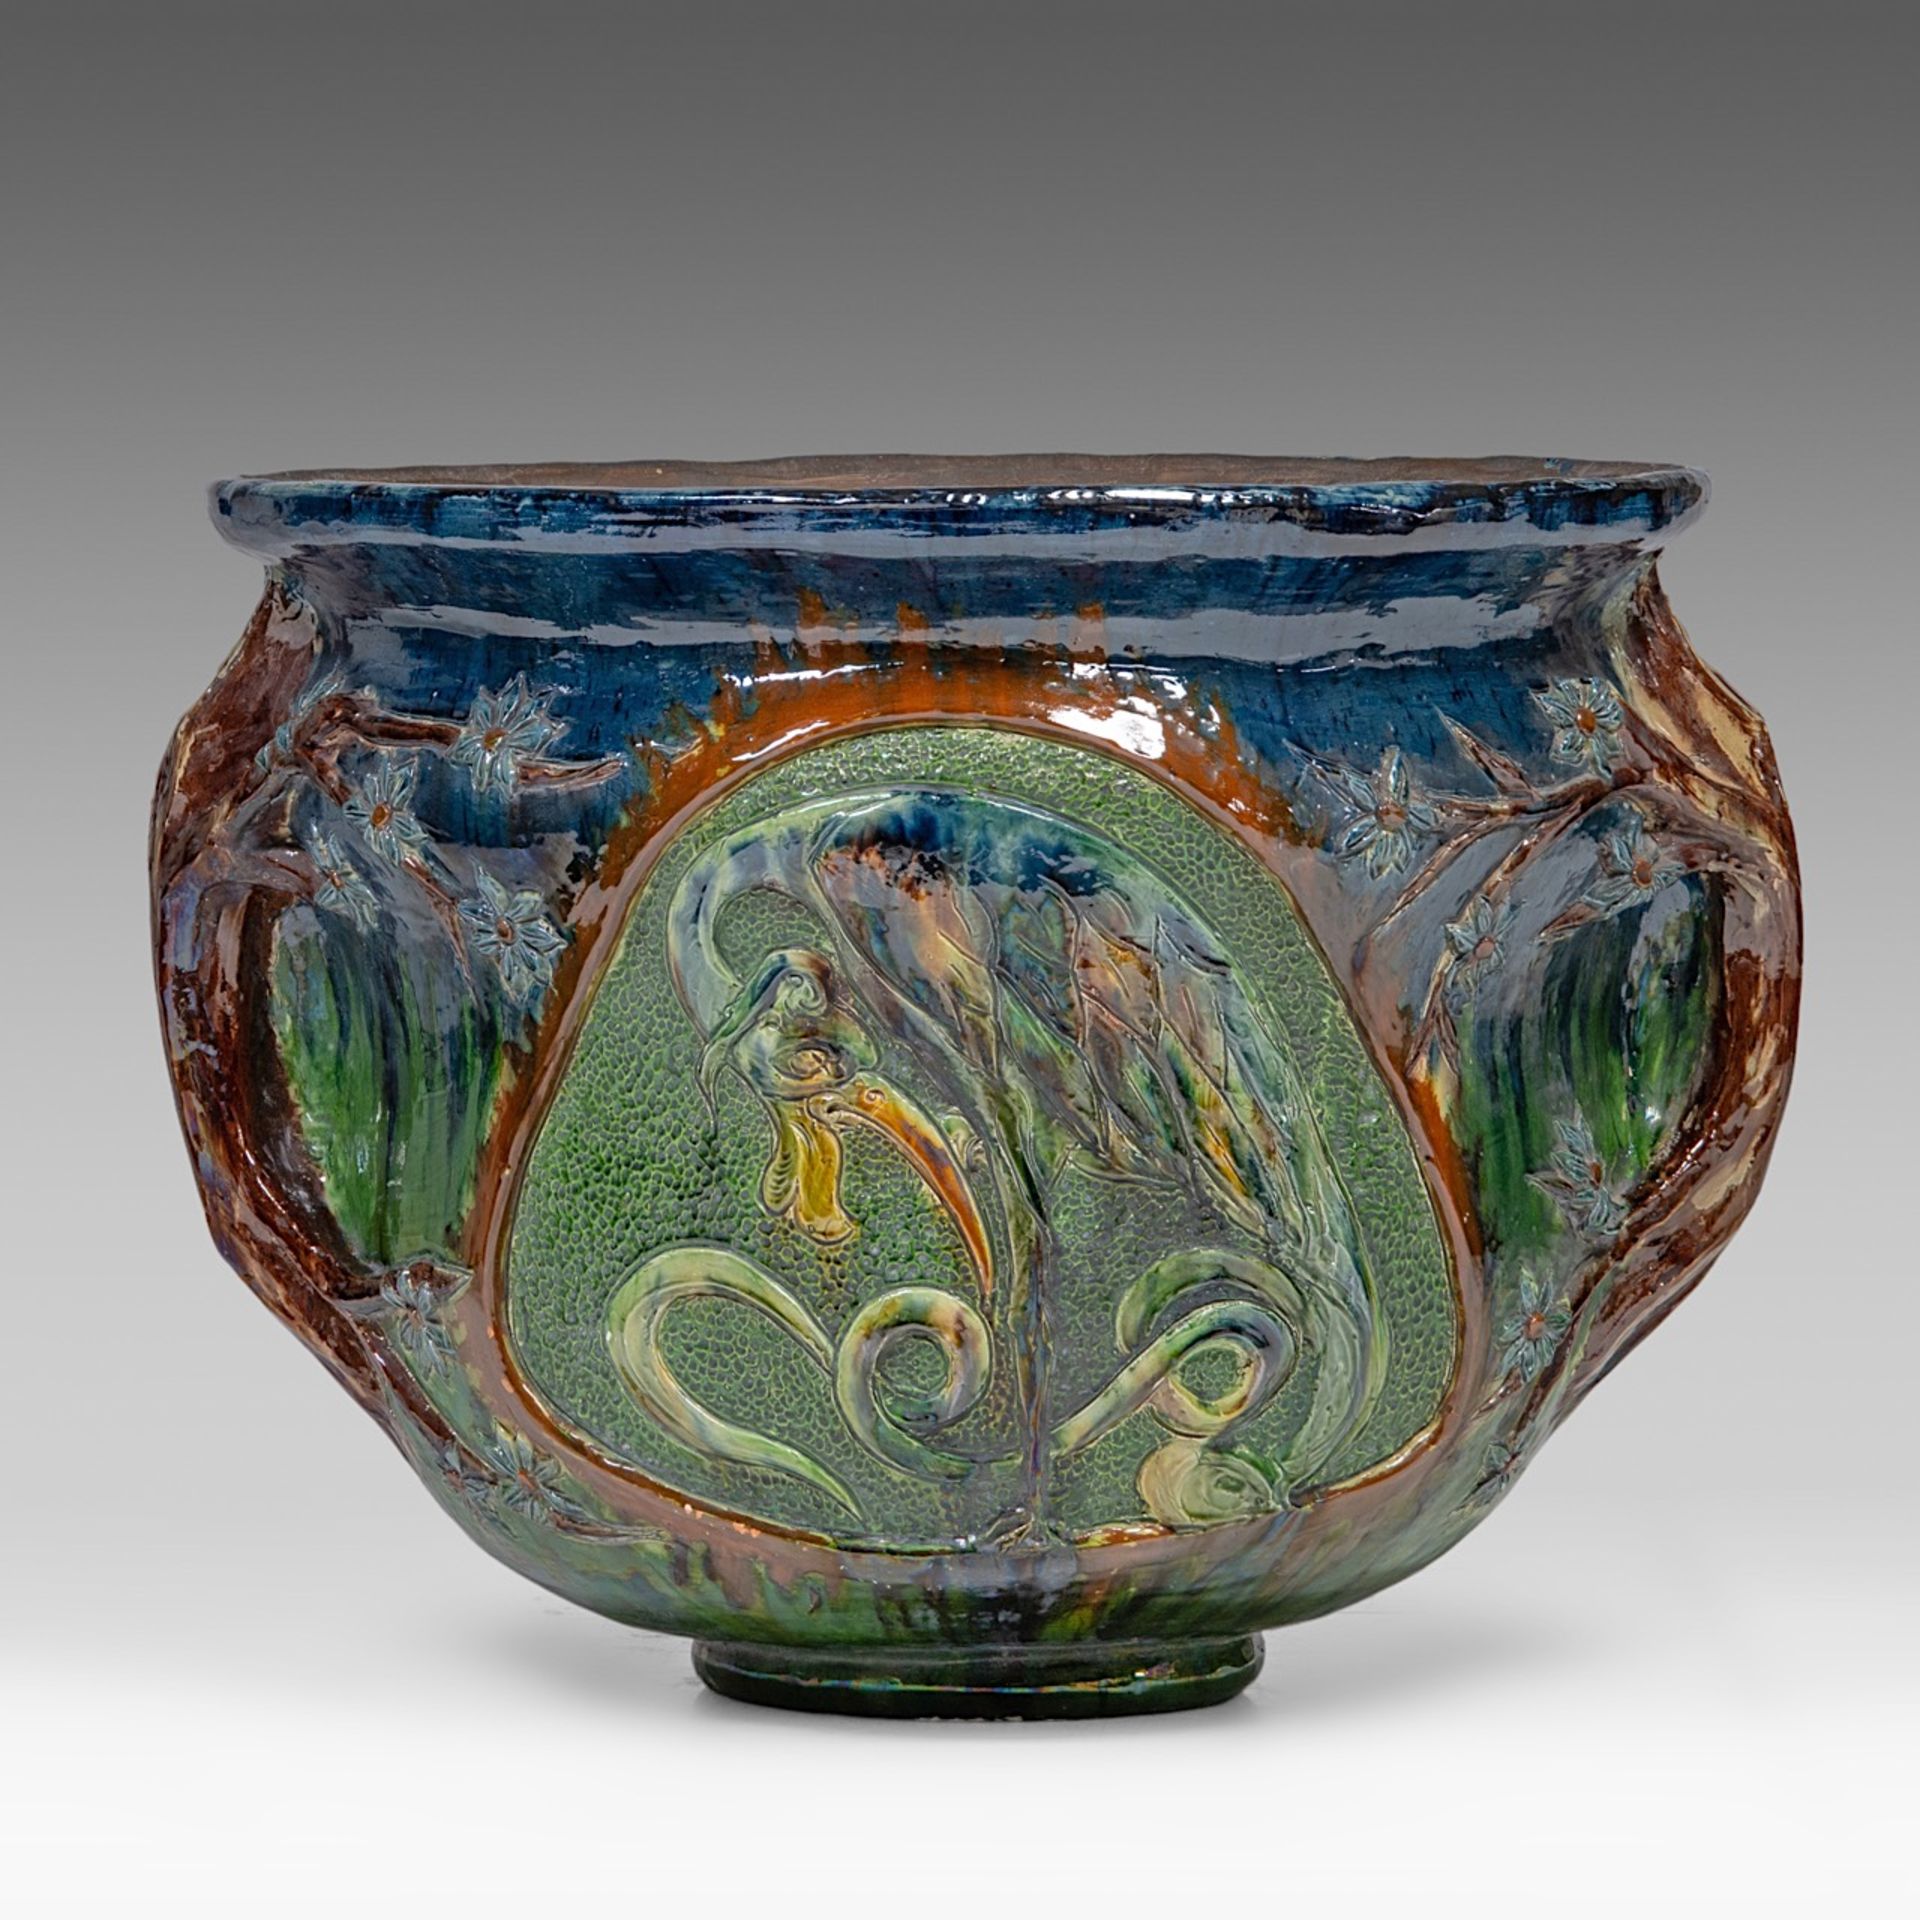 An imposing Art Nouveau polychrome earthenware cachepot on stand by the Caesens pottery manufactory, - Image 7 of 19